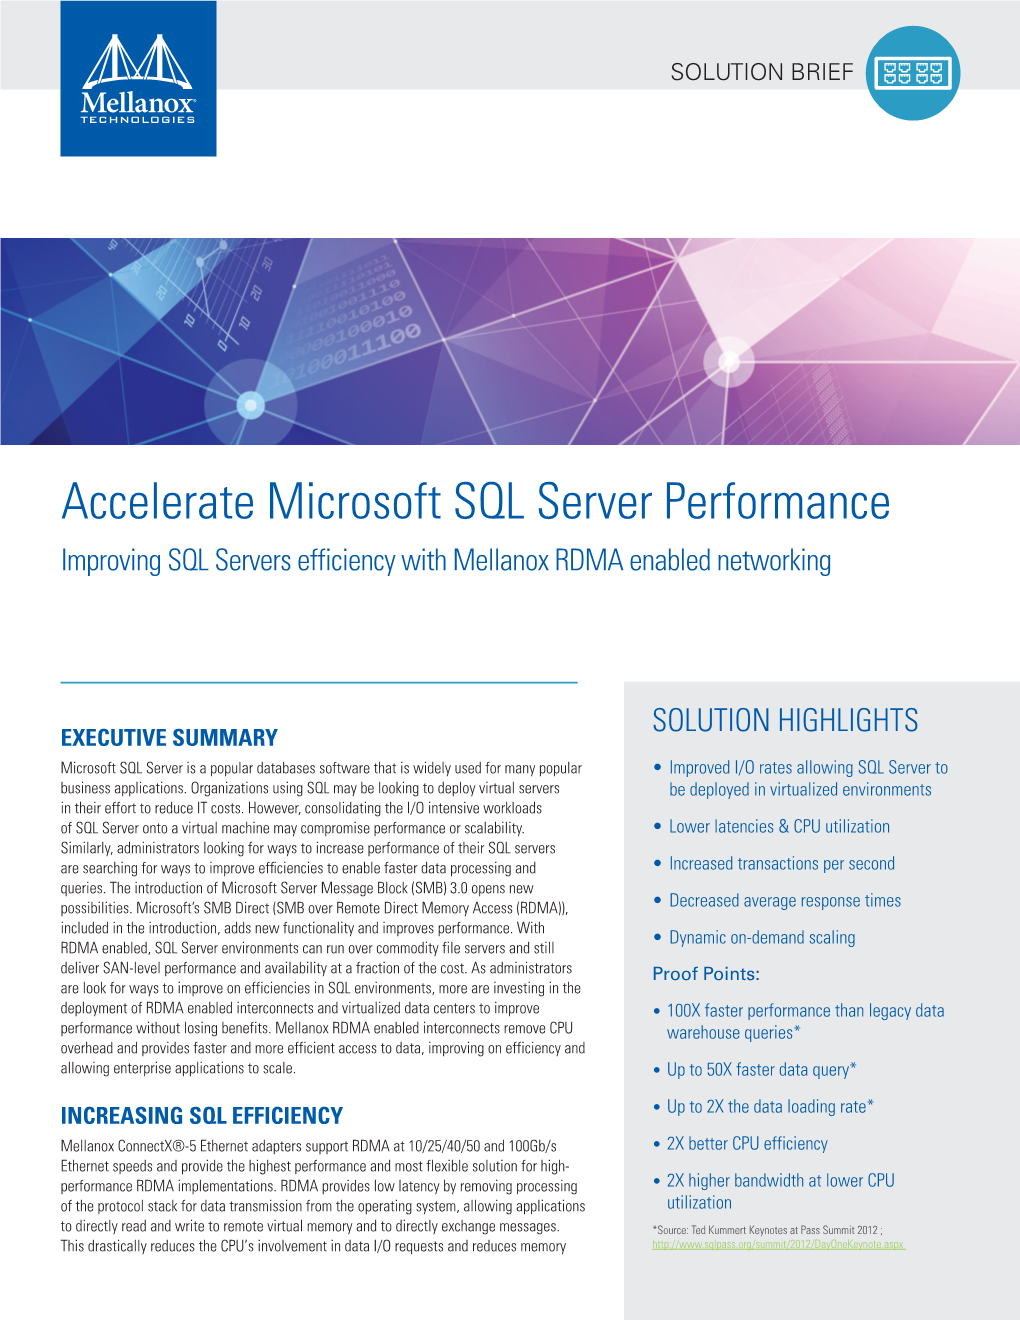 Accelerate Microsoft SQL Server Performance Improving SQL Servers Efficiency with Mellanox RDMA Enabled Networking